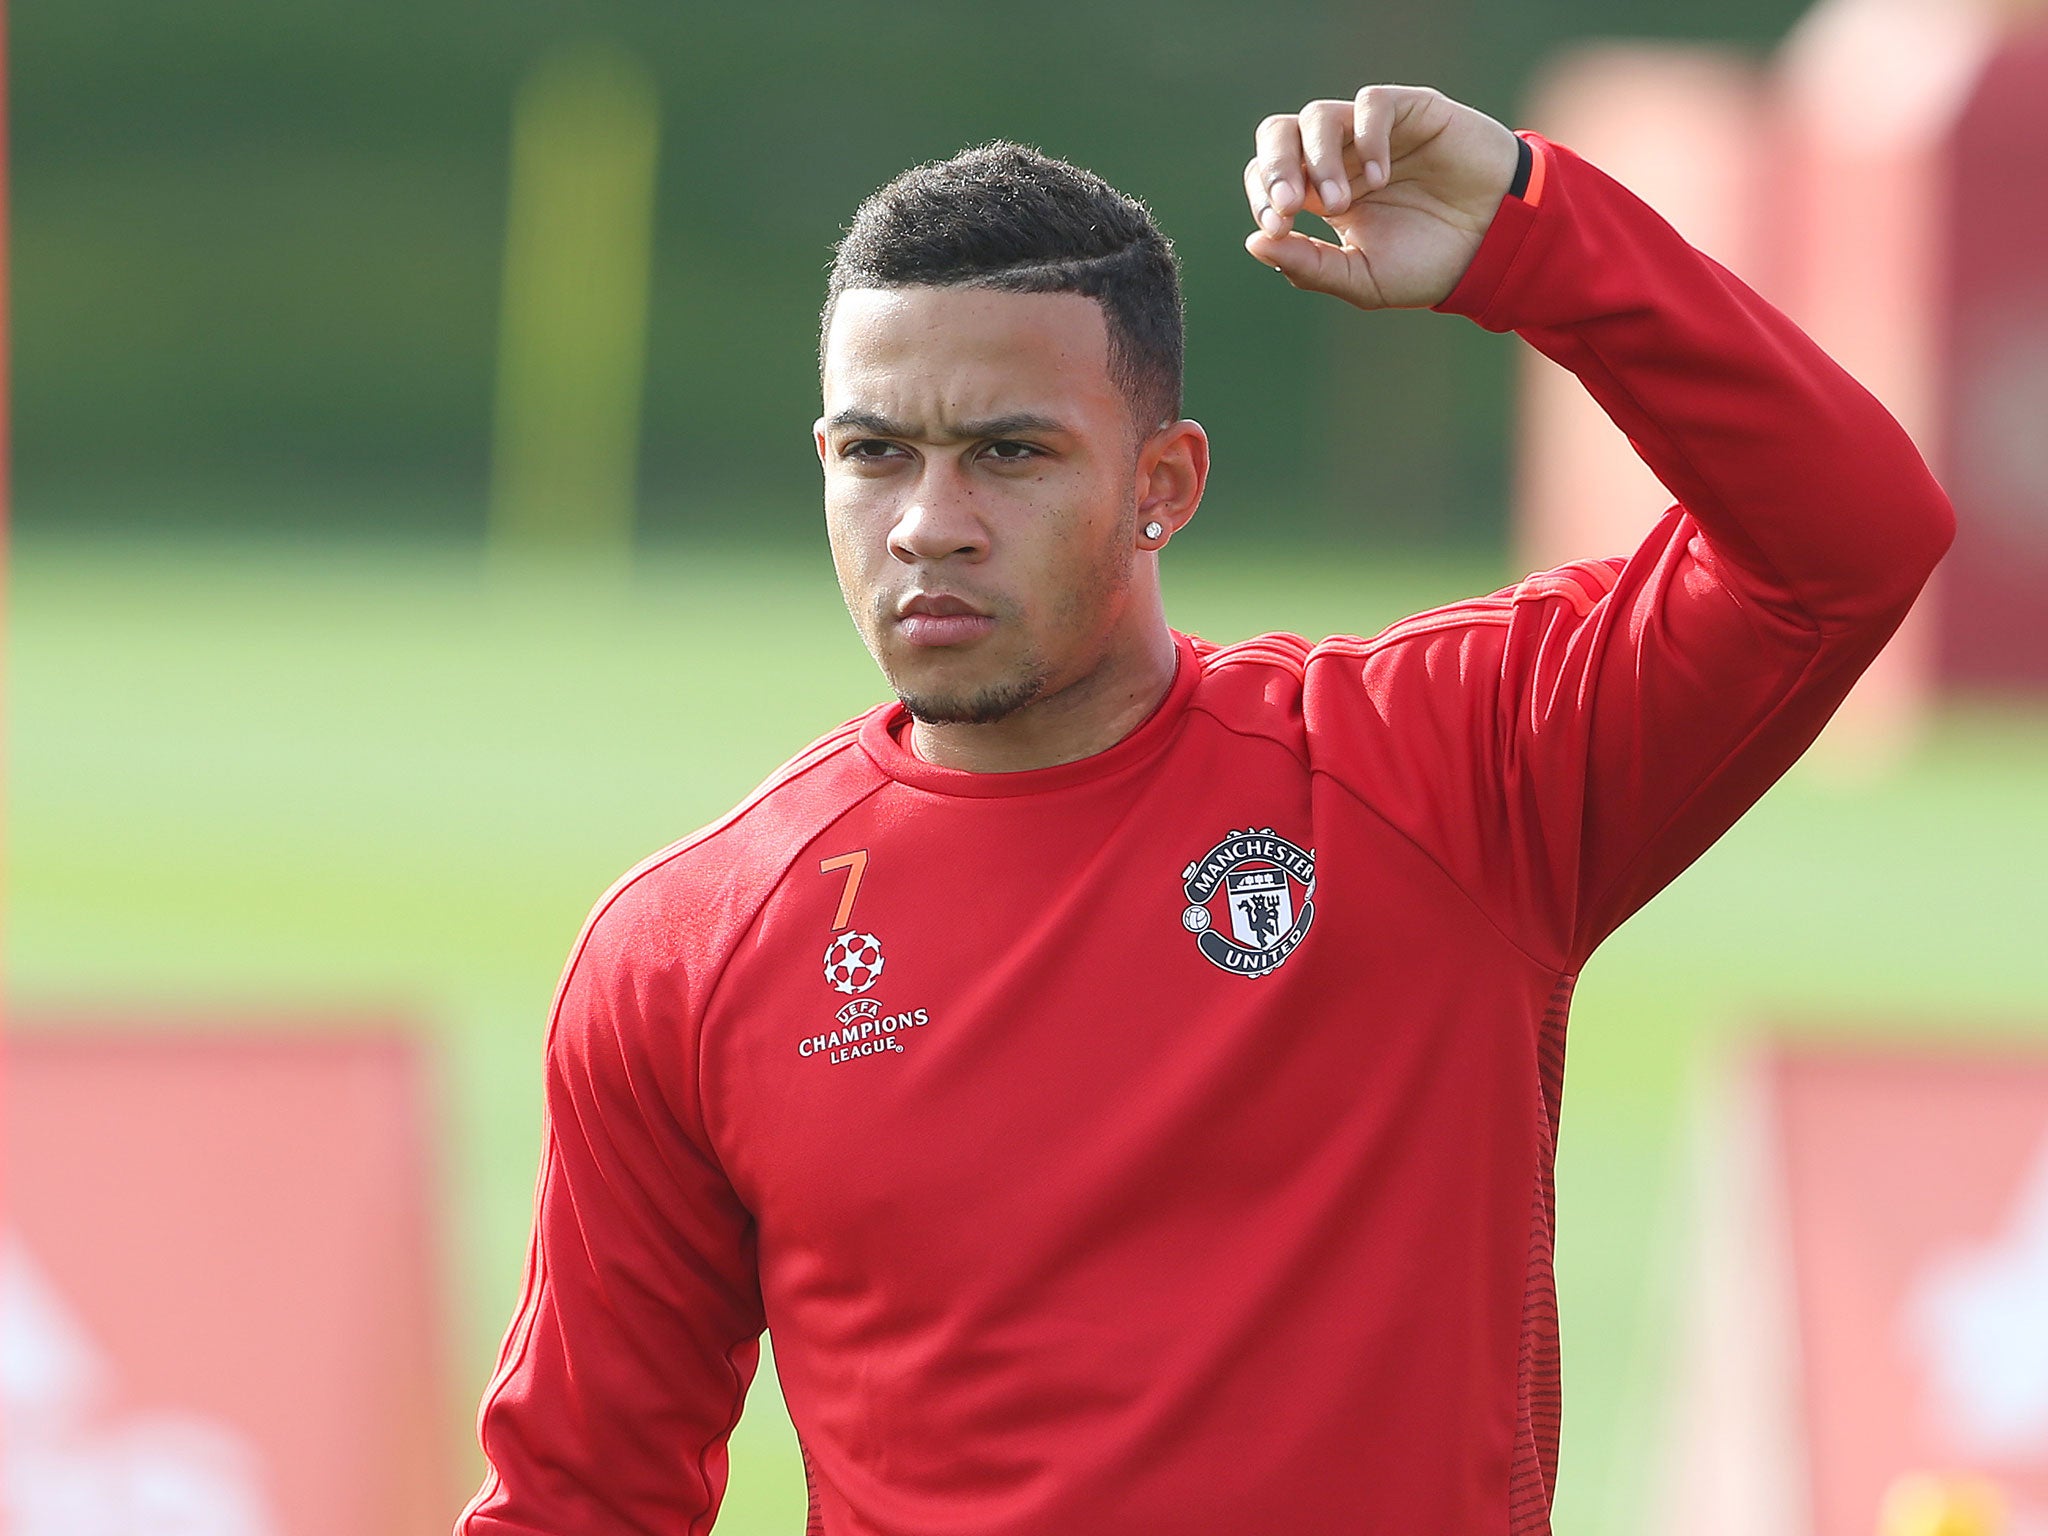 Manchester United forward Memphis Depay faces his former team PSV